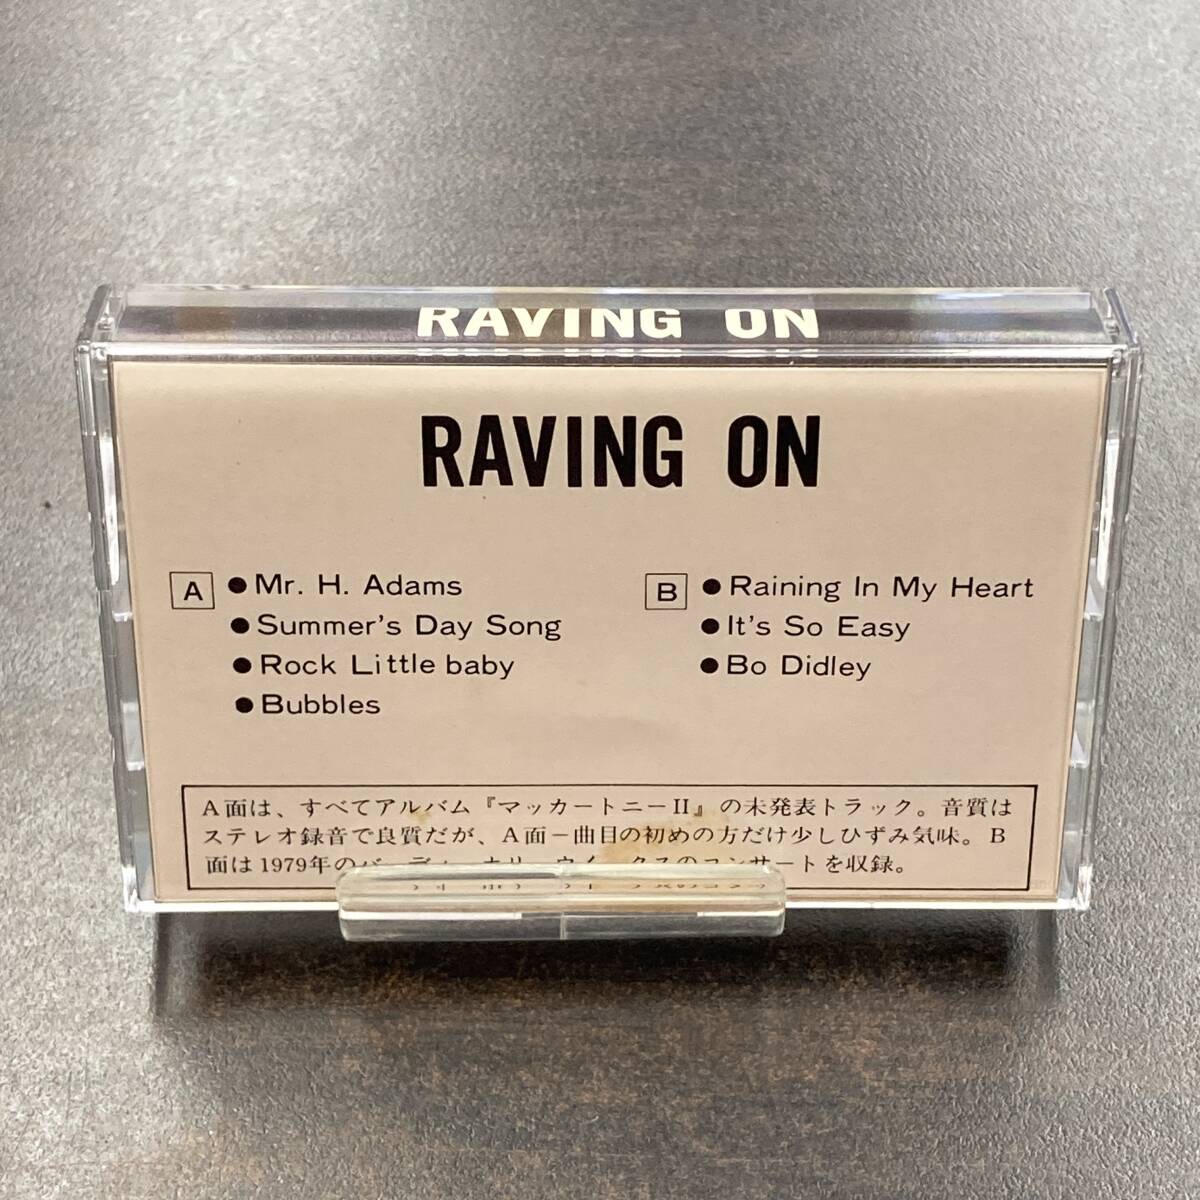 1220M ザ・ビートルズ 研究資料 RAVING ON カセットテープ / THE BEATLES Research materials Cassette Tapeの画像6